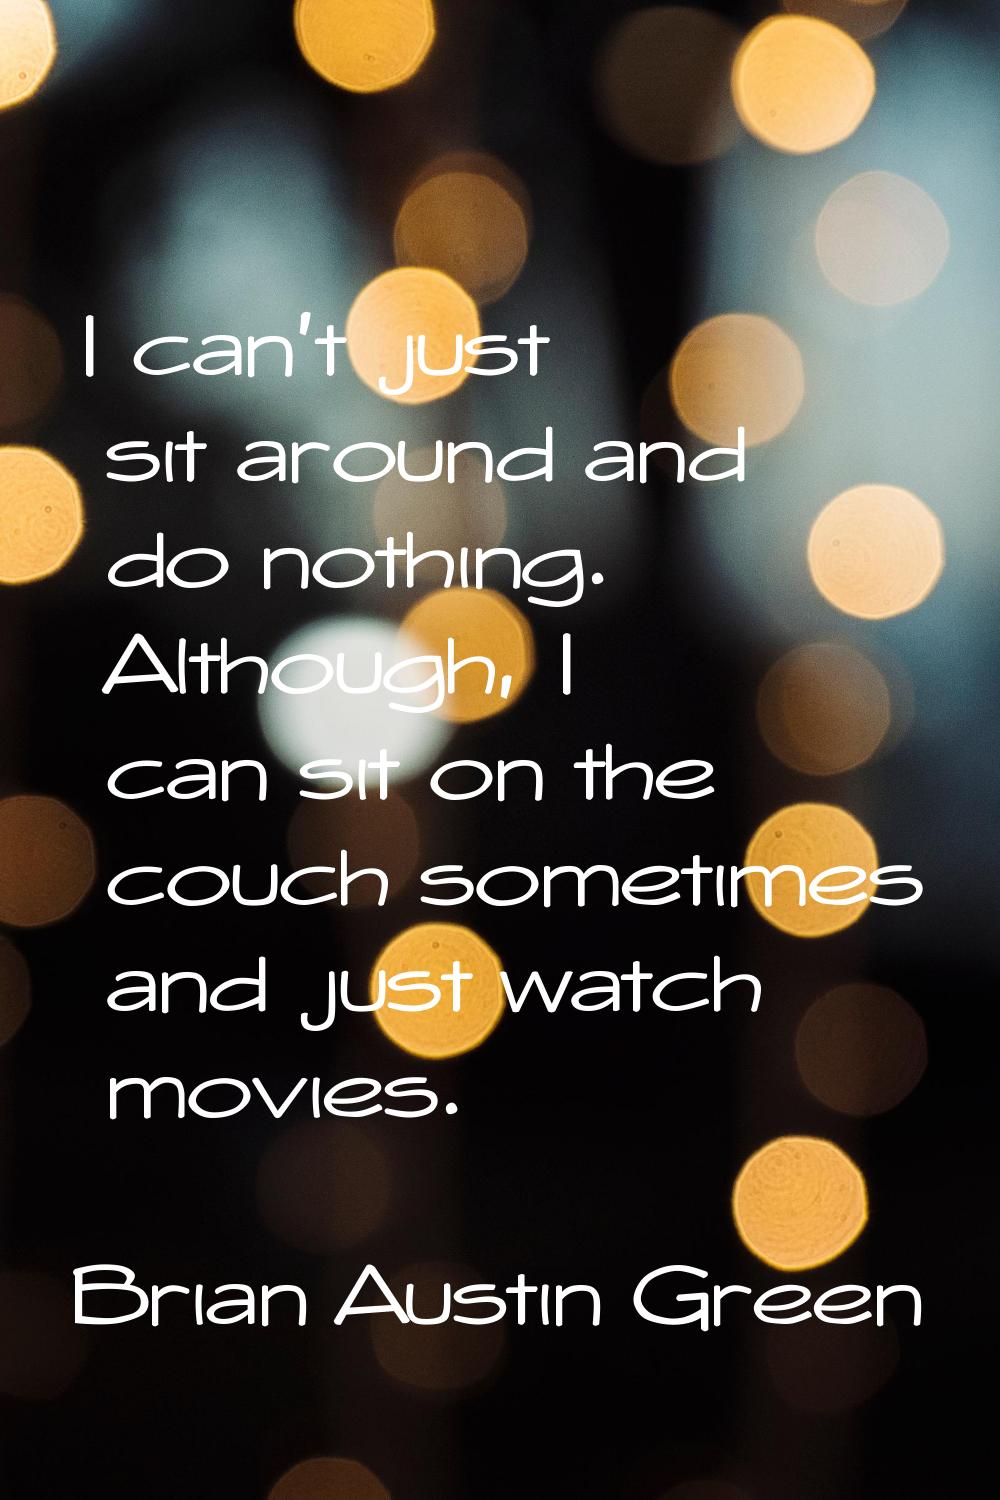 I can't just sit around and do nothing. Although, I can sit on the couch sometimes and just watch m